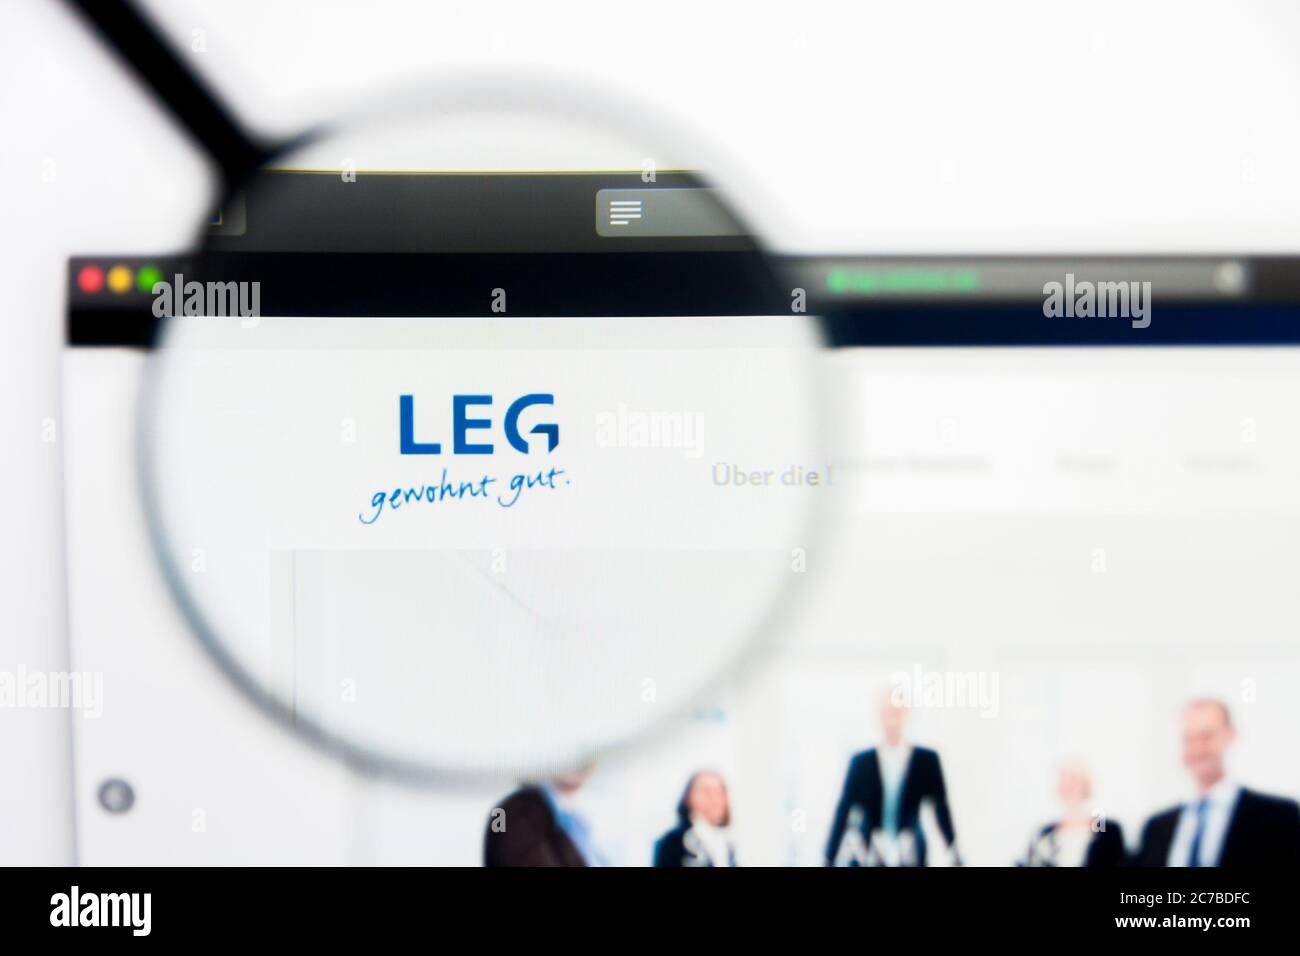 Los Angeles, California, USA - 25 March 2019: Illustrative Editorial of LEG Immobilien AG website homepage. LEG Immobilien AG logo visible on display Stock Photo